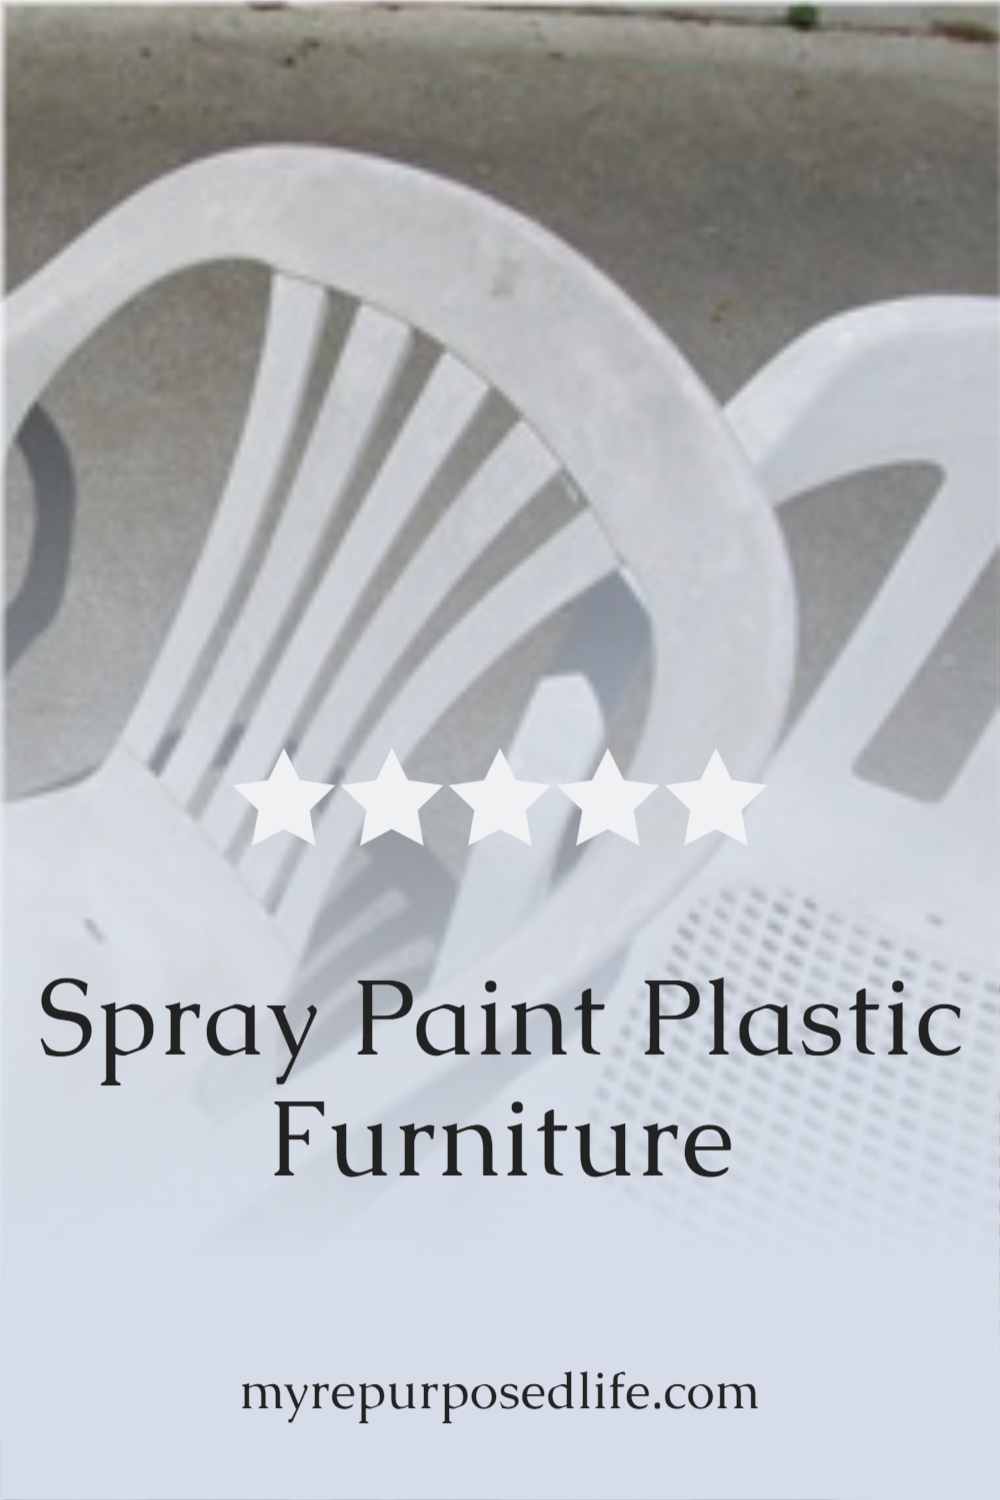 How to spray paint plastic chairs. You know those old white chairs you have? They are pitted and ugly? Easy fix with some colorful spray paint! Refresh wrought iron metal furniture with spray paint too! #MyRepurposedLife #spraypaint #lawnfurniture #plastic #outdoor #furniture via @repurposedlife